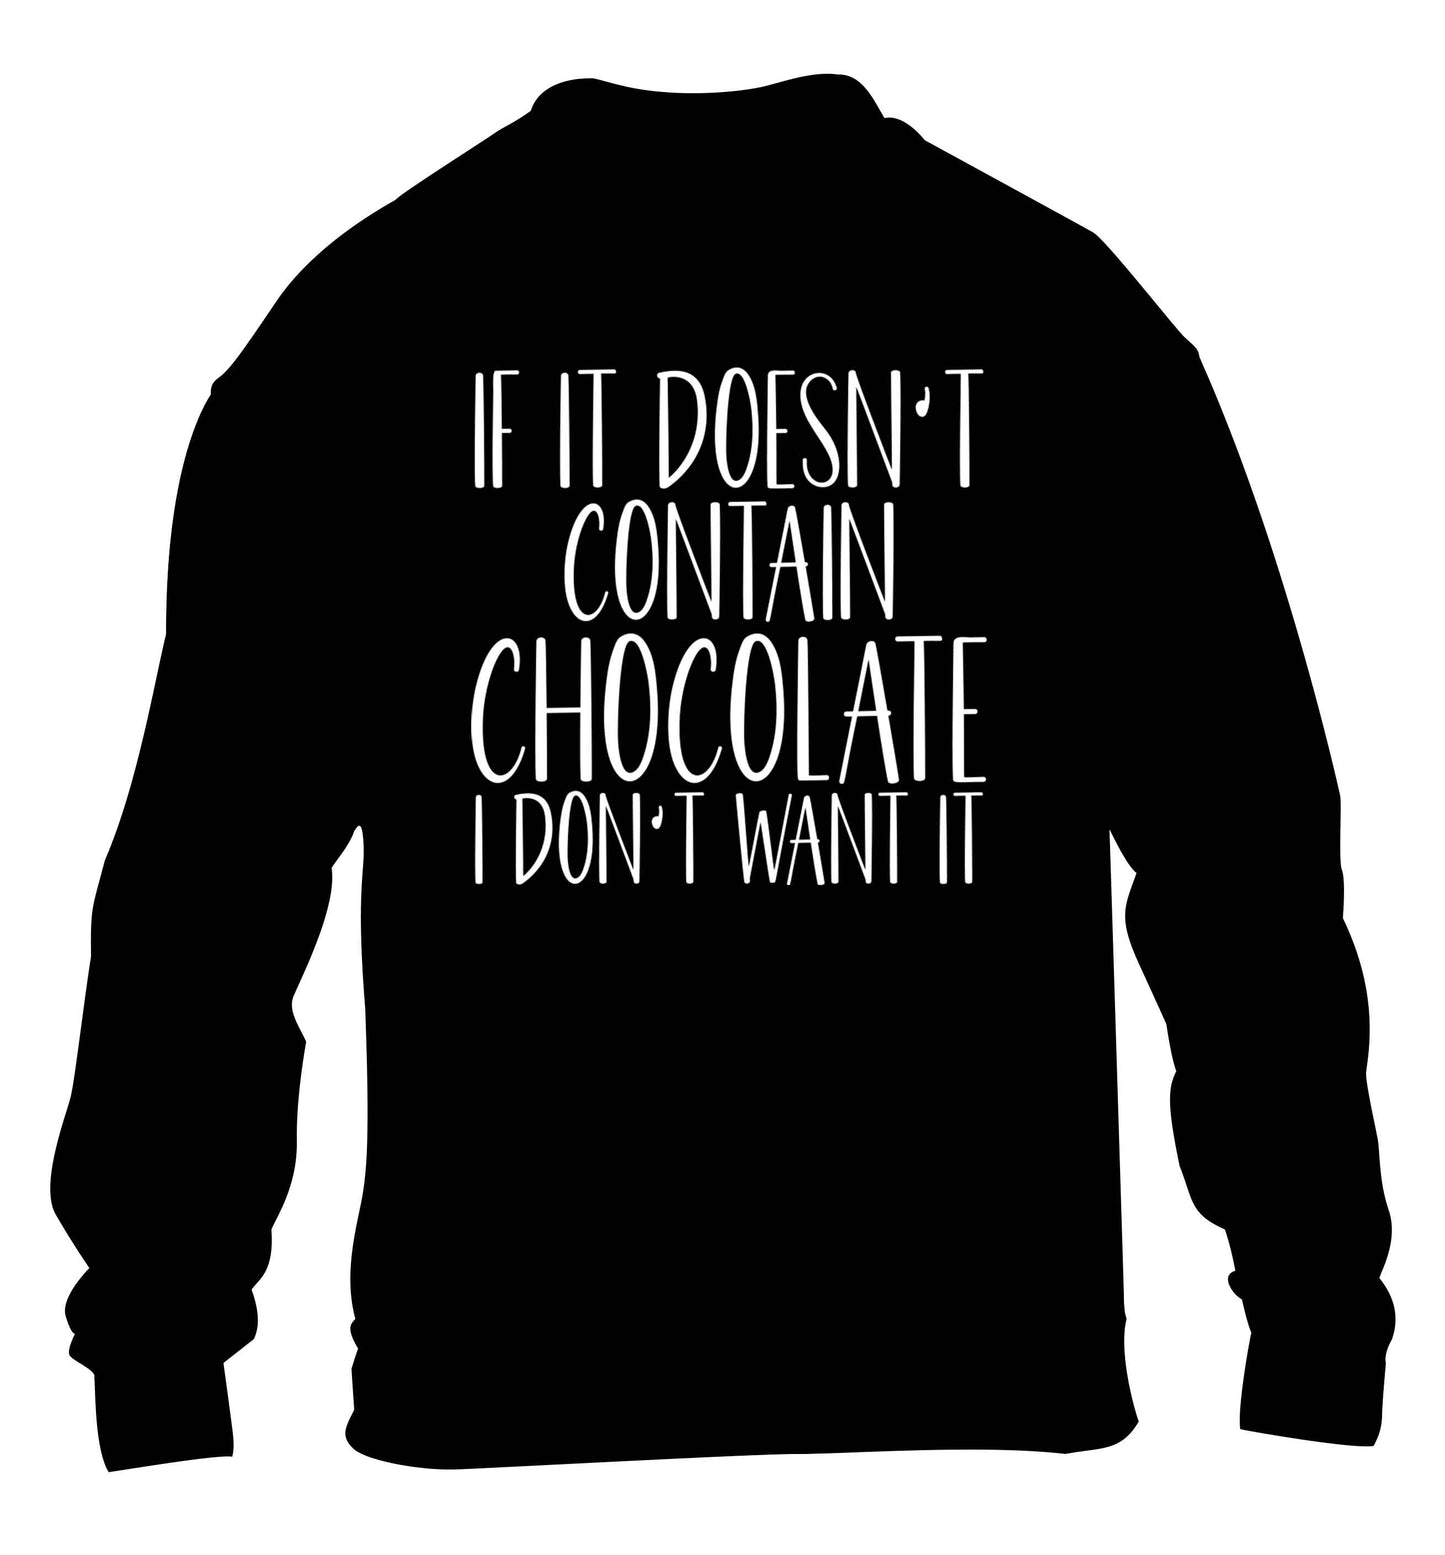 If it doesn't contain chocolate I don't want it children's black sweater 12-13 Years